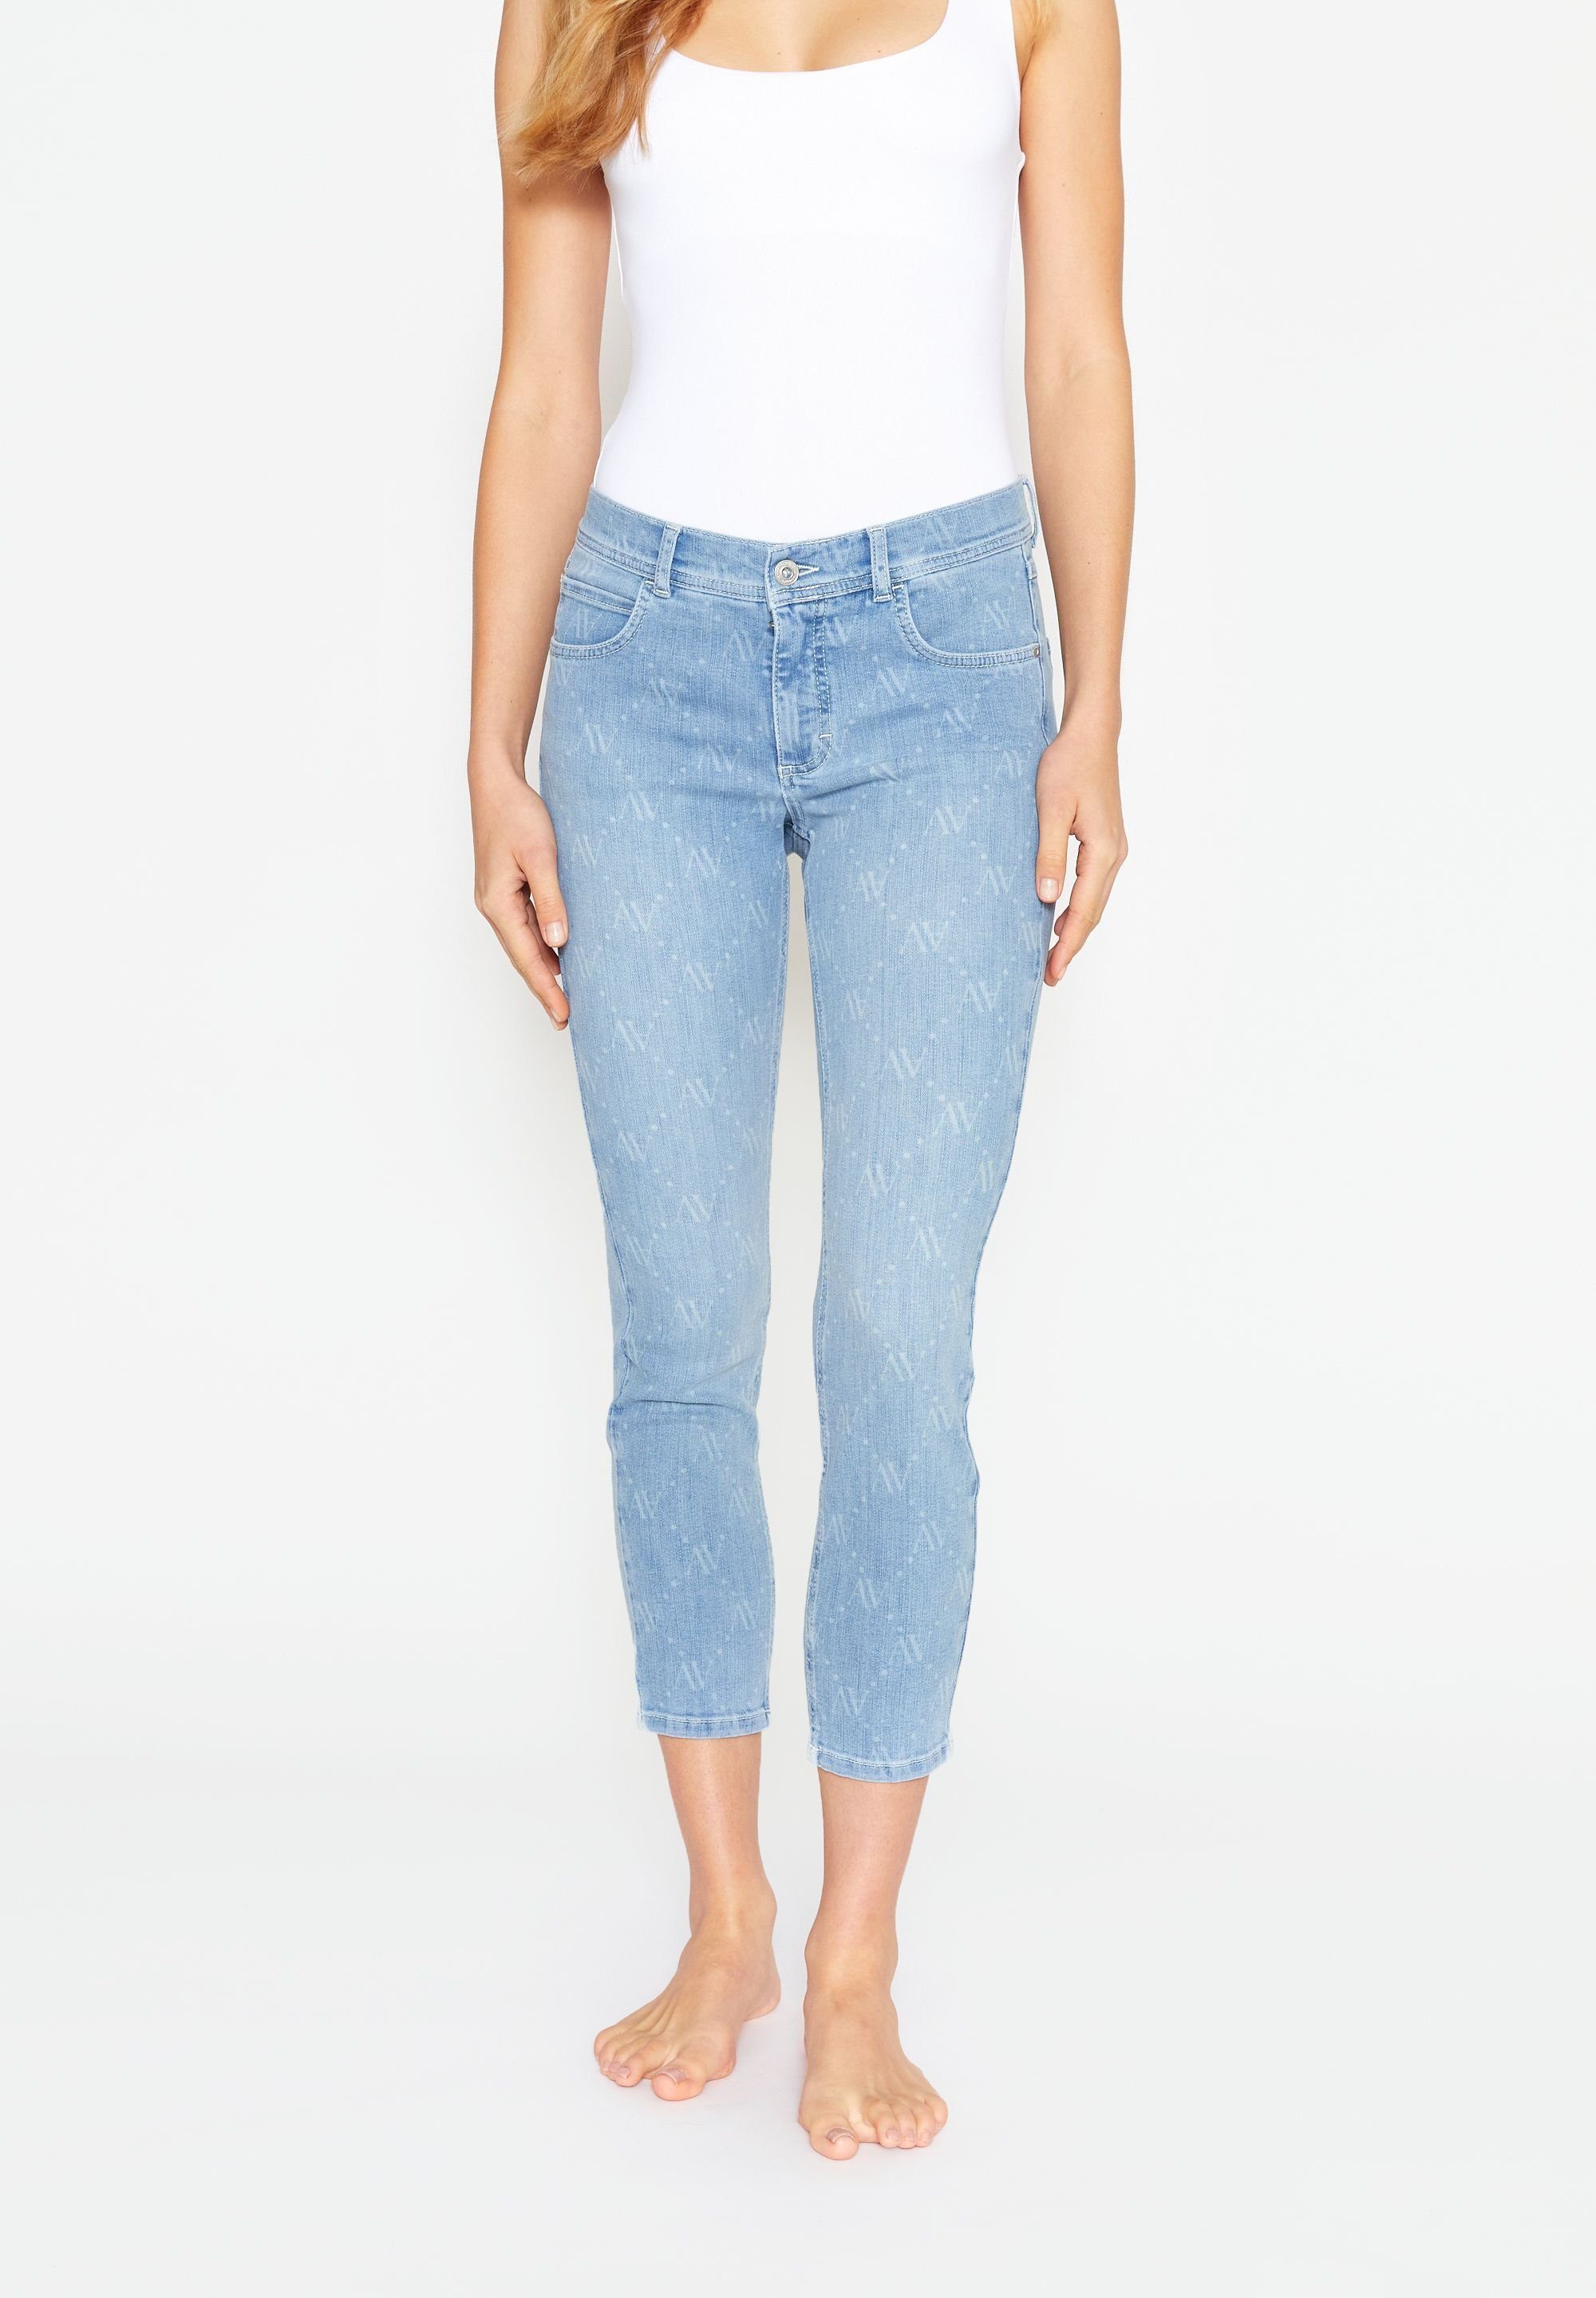 ANGELS 7/8-Jeans Ornella mit Allover-Muster